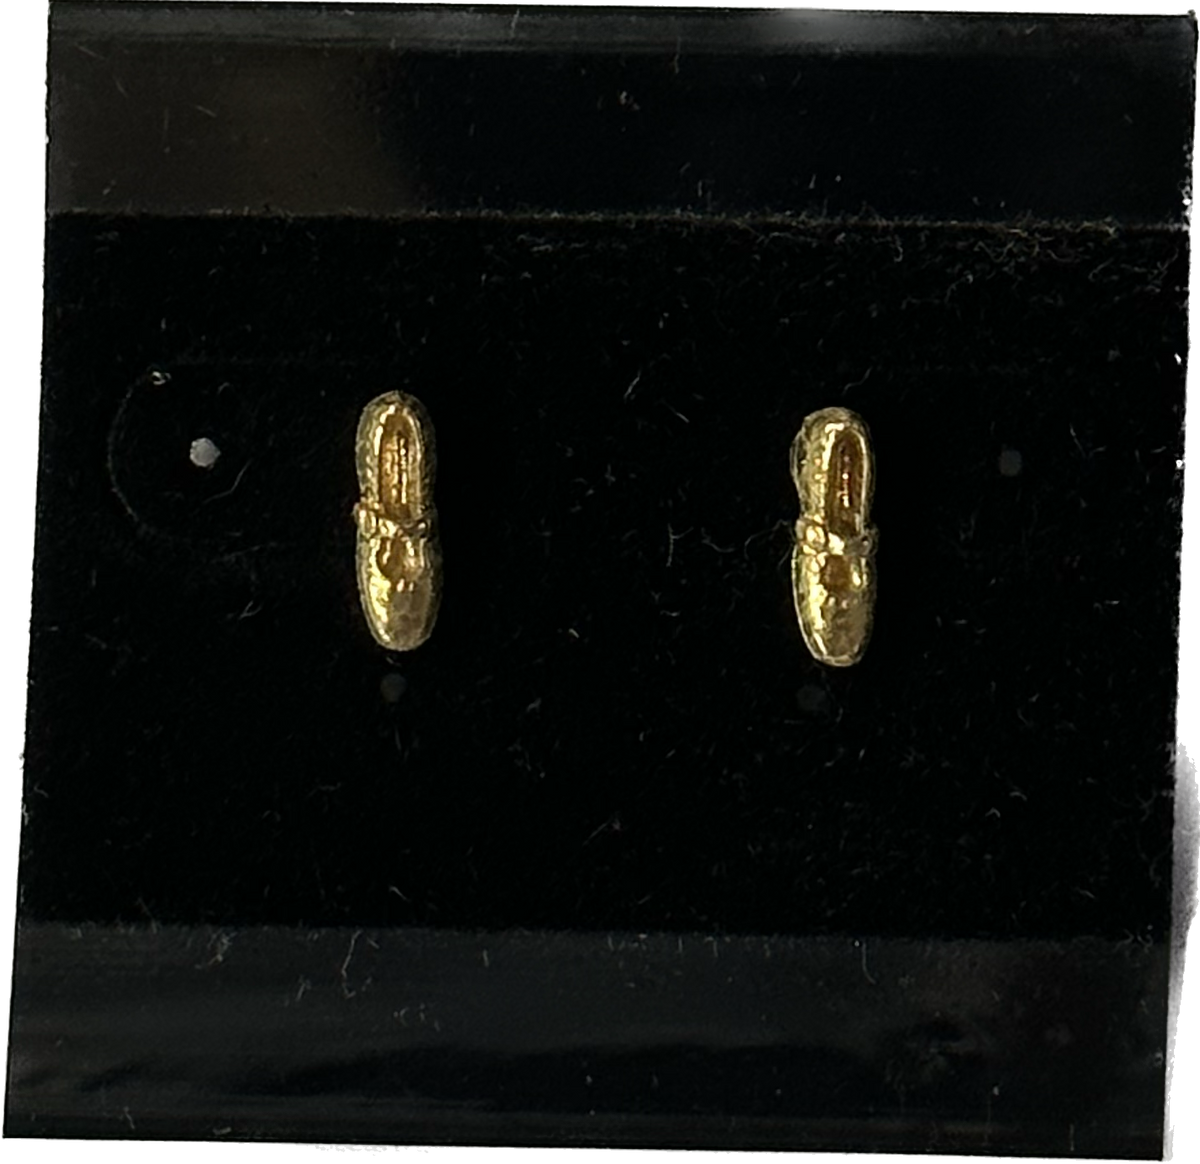 A gift of Gold Post Square Dance Shoe Earrings by Square Up Fashions in a black box.